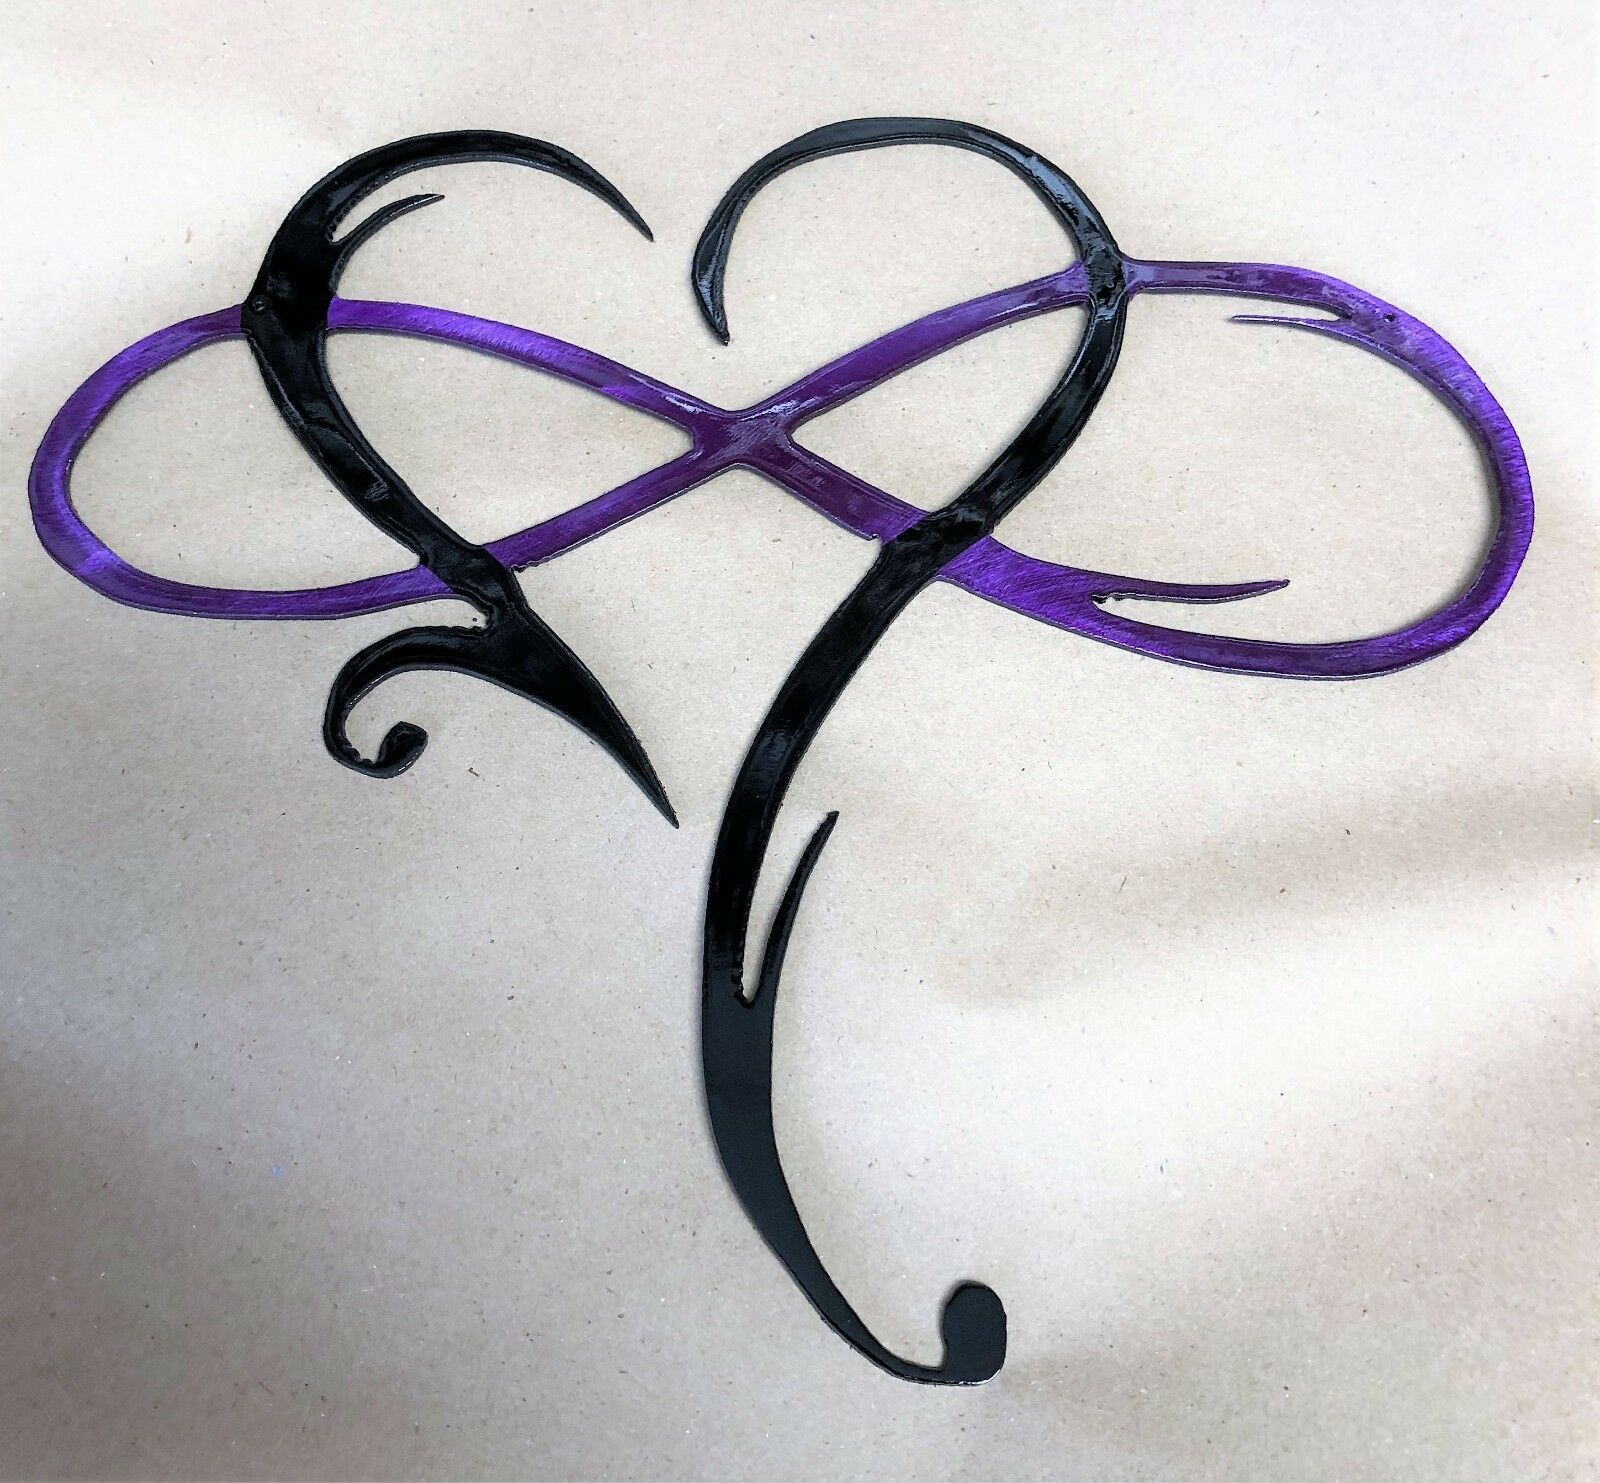 Primary image for Infinity Heart - Metal Wall Art - Purple & Black 10 3/4" x 12 1/4"